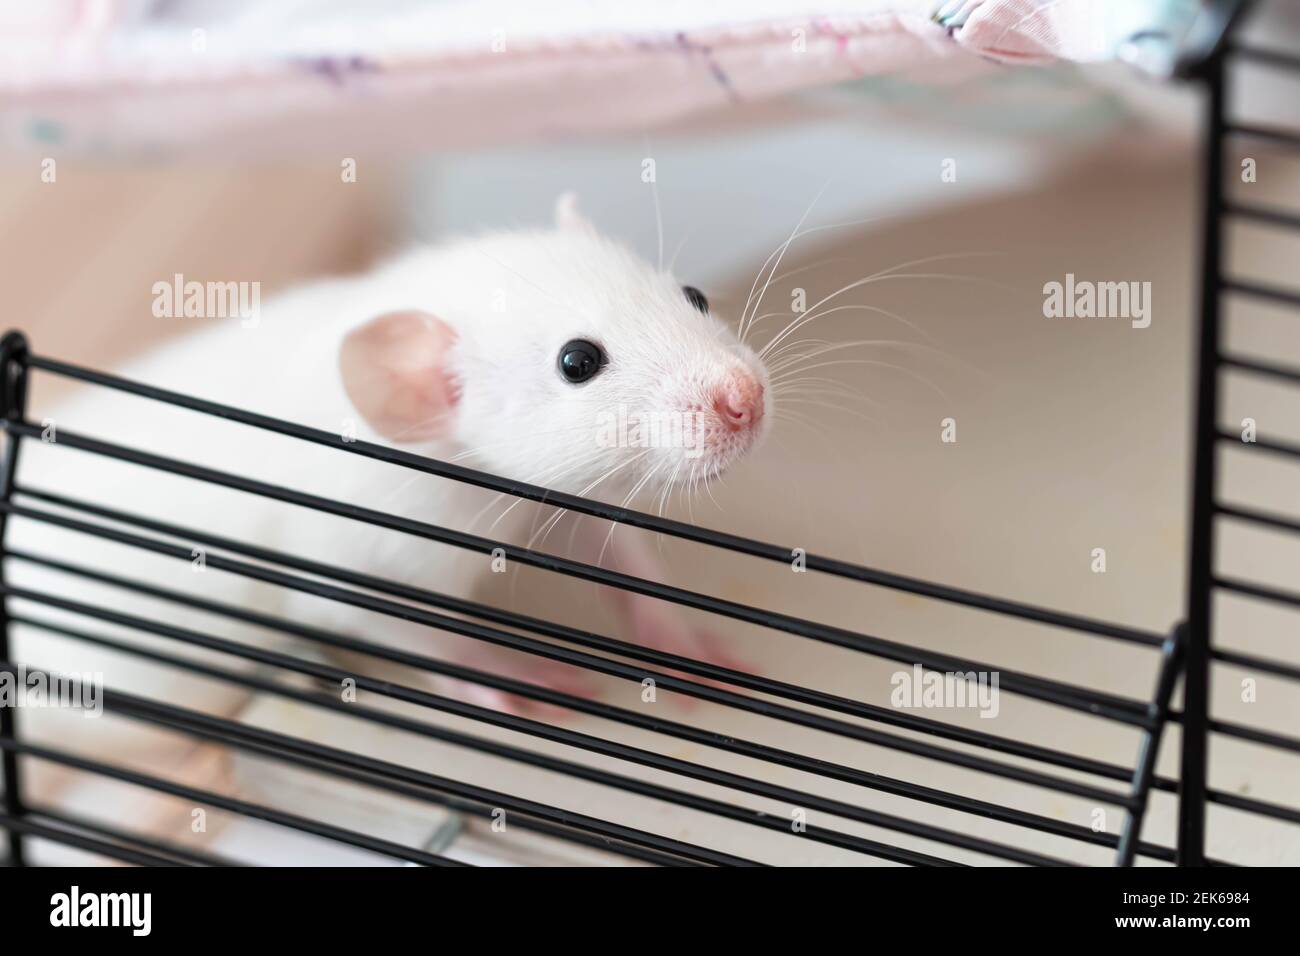 Rat close-up. macro photography. A cute little face with a pink nose and long mustache peeks out of the cage Stock Photo